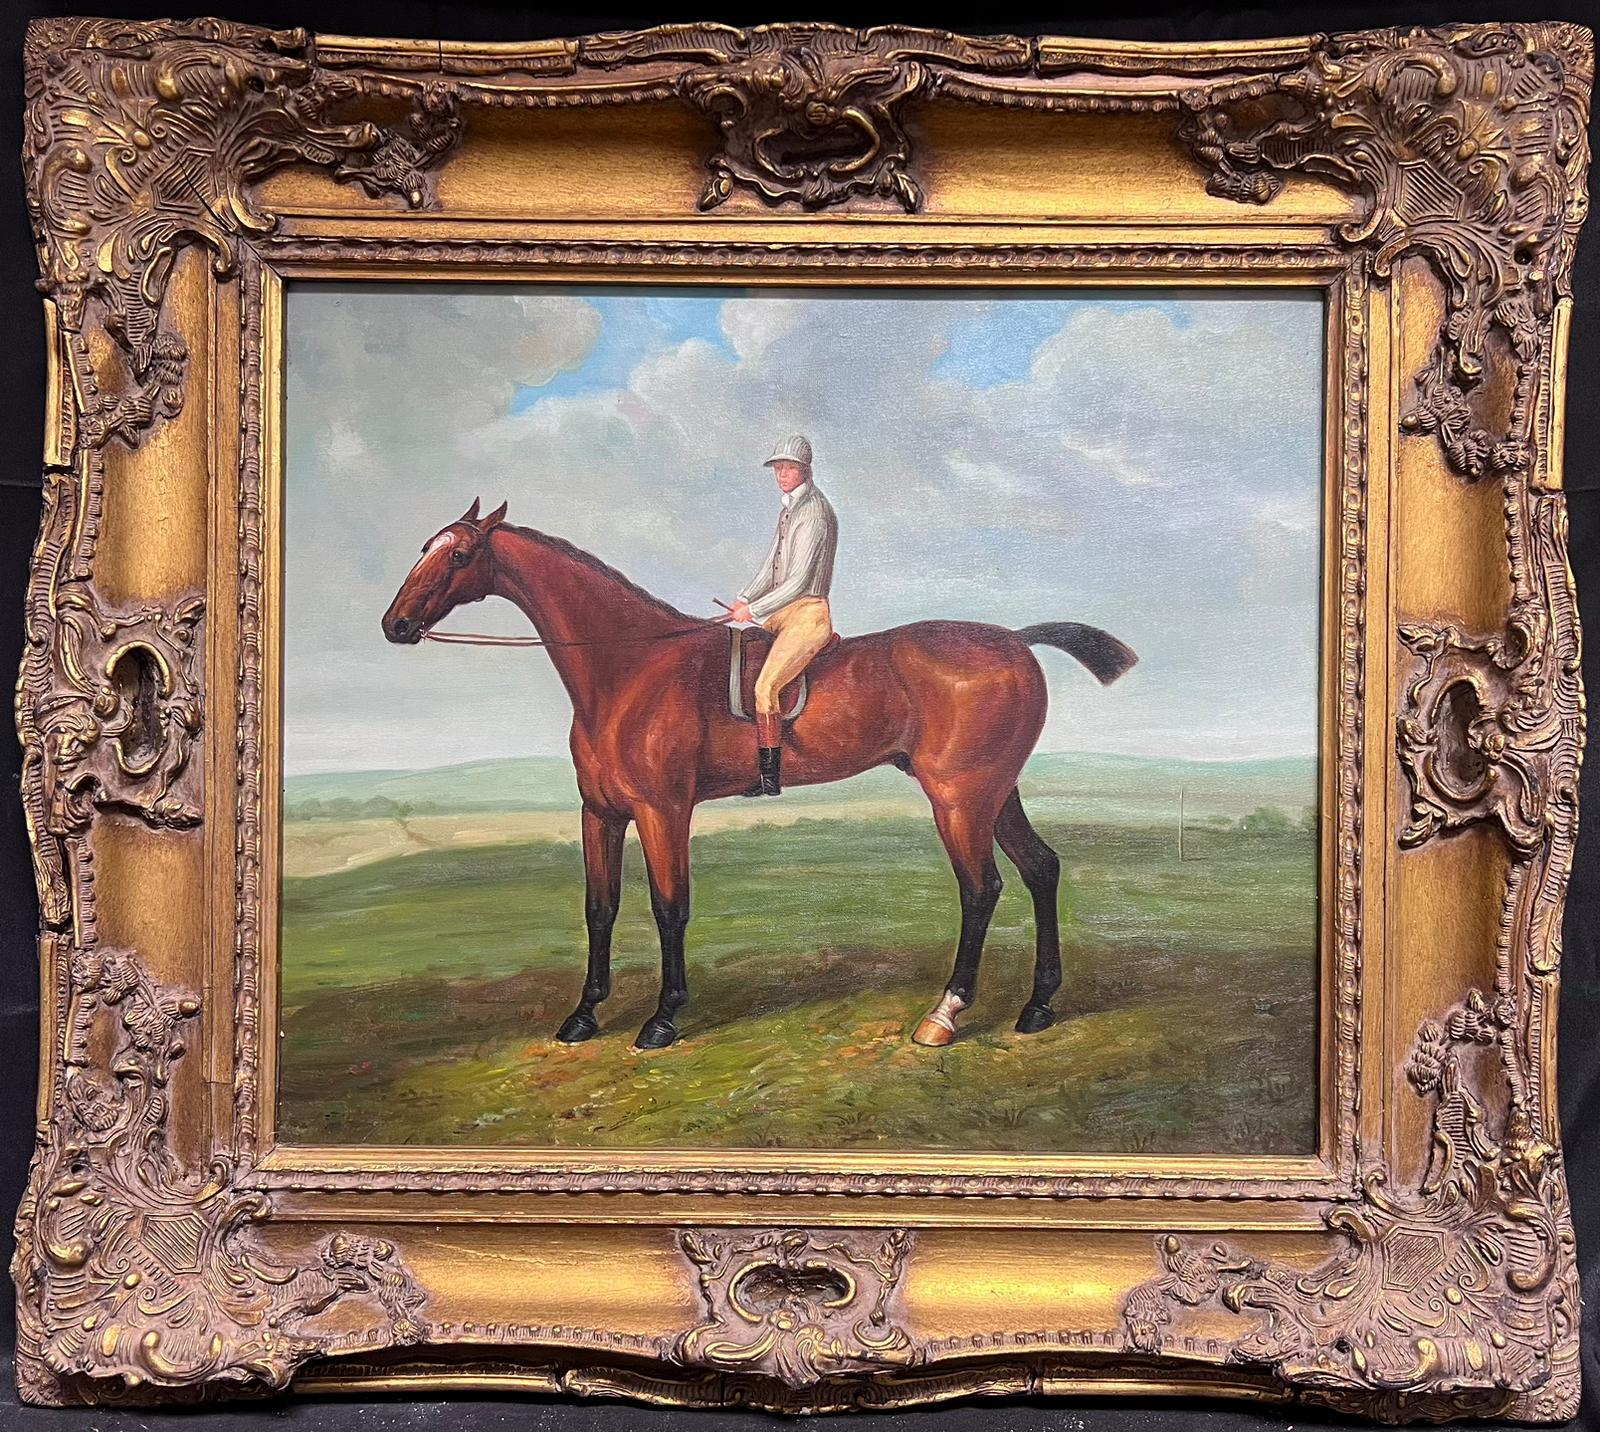 Jockey on Horseback
British School, 20th century
painted after an earlier style
oil on canvas, framed
framed: 31 x 35 inches
canvas: 20 x 24 inches
provenance: private collection, UK
condition: very good and sound condition; the frame is very